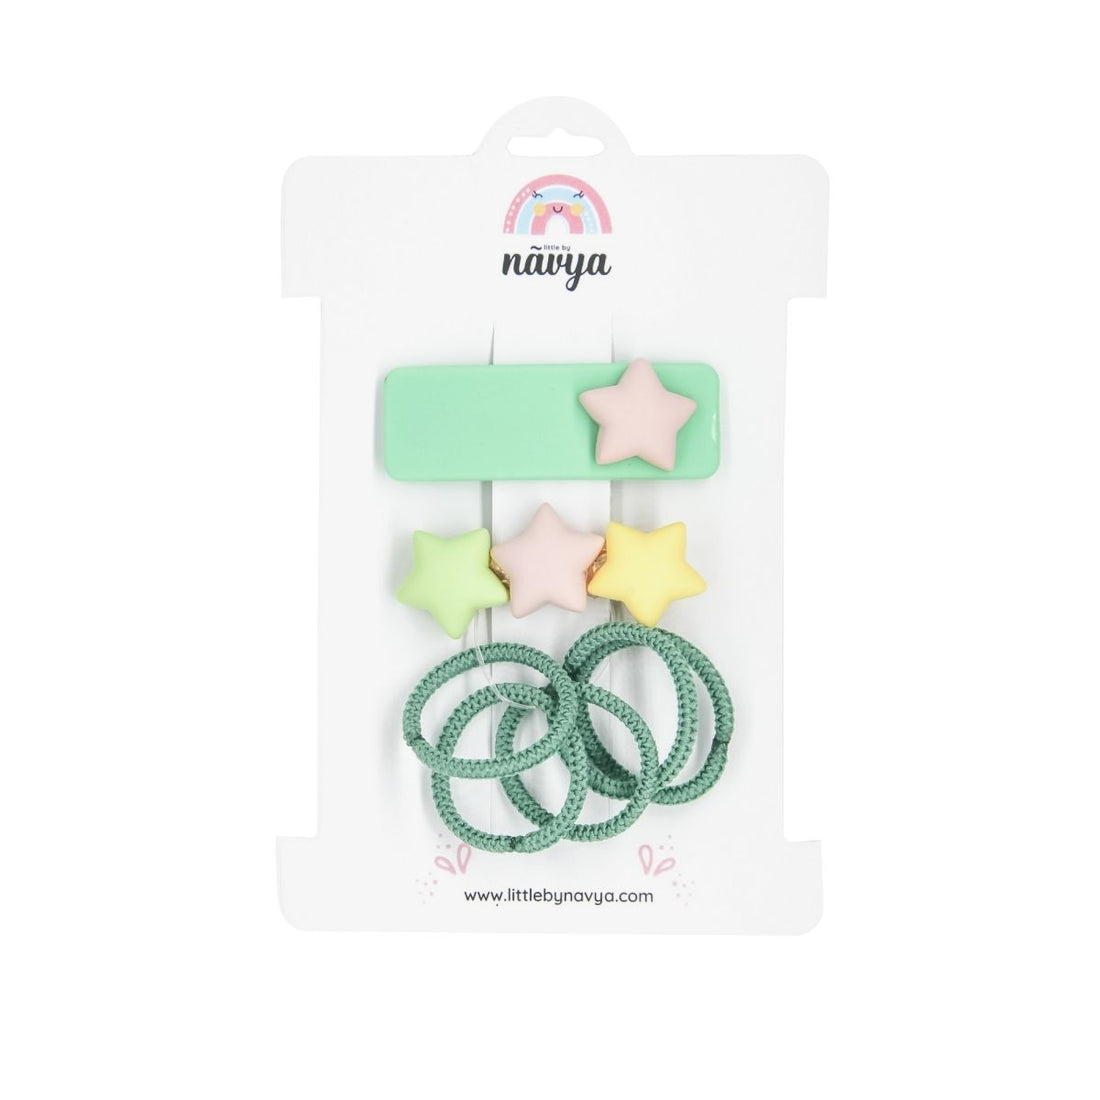 Star-Gazing Adventure - Hair Clip & Rubber band Set - (2-7 years) for girls